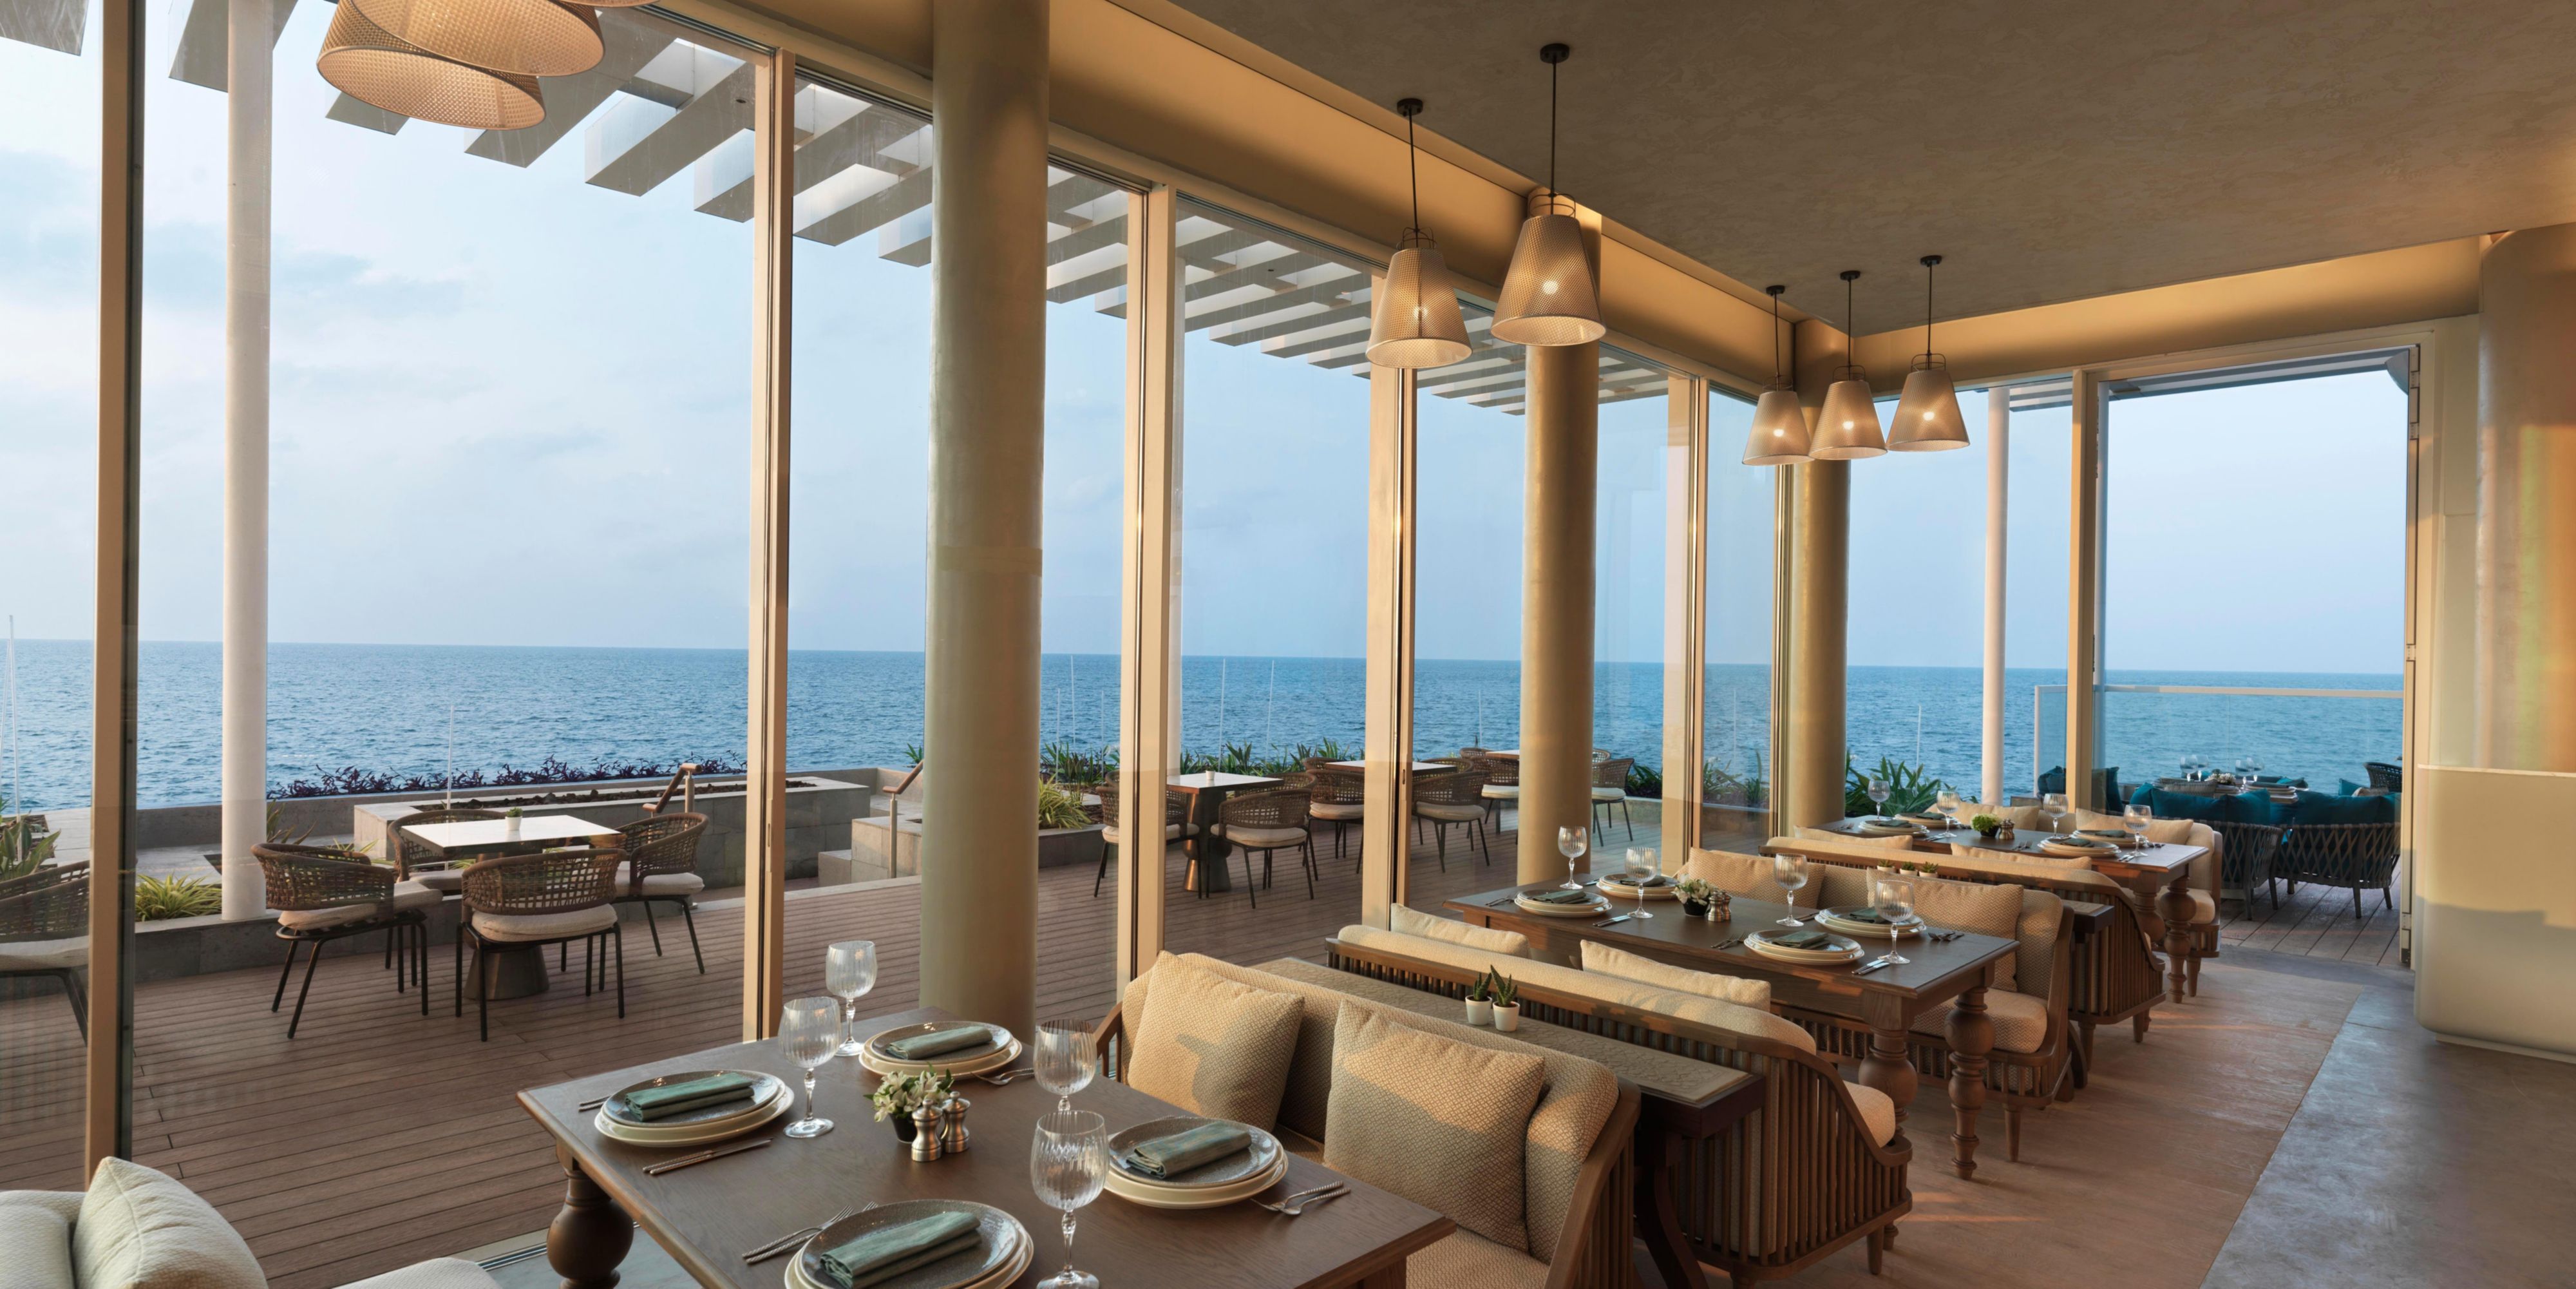 From dinner for two under a starlit sky to dining with 360-degree ocean views, indulge in 
culinary experiences that offer cuisine for any taste, in venues with their own individual stories.